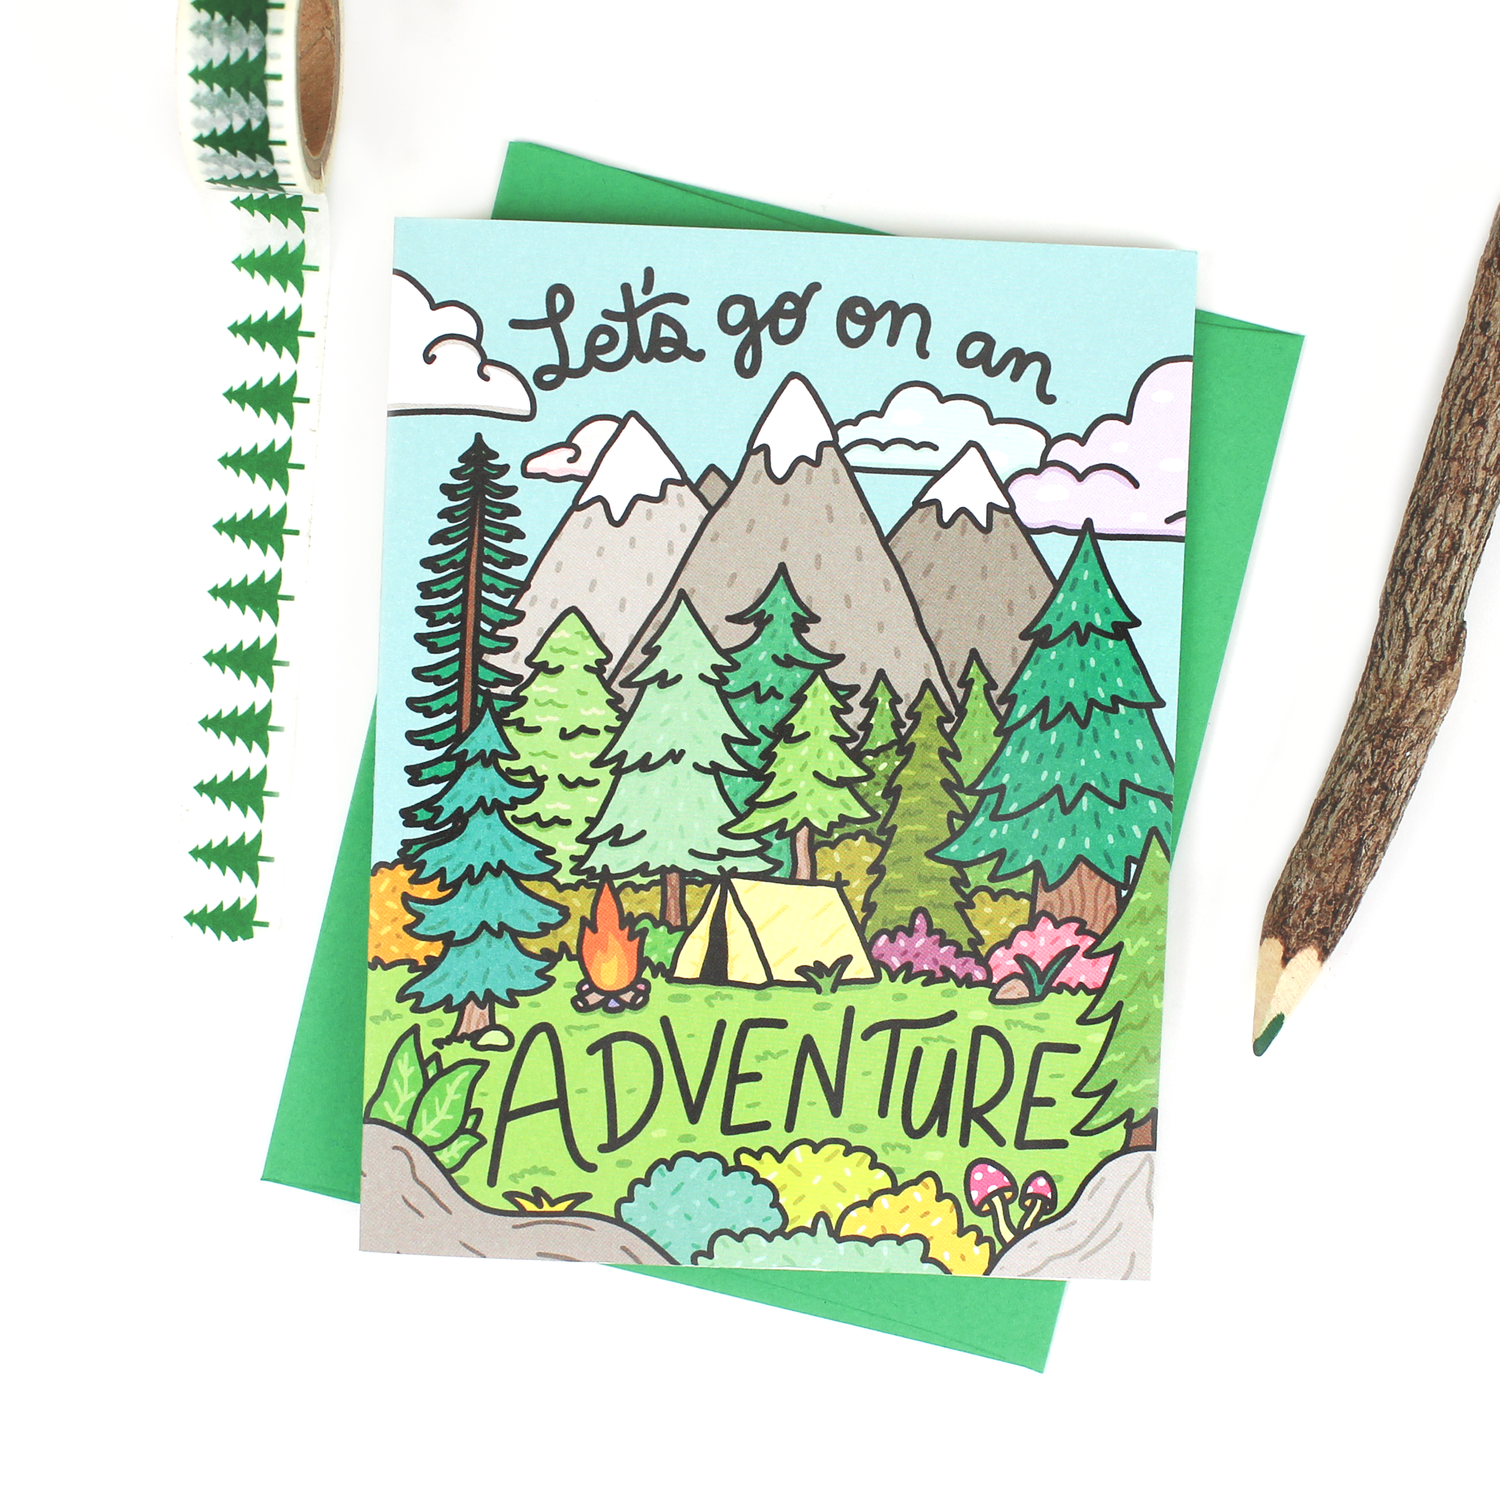 Let's go on an adventure mountain camping card with green envelope by Turtle's Soup